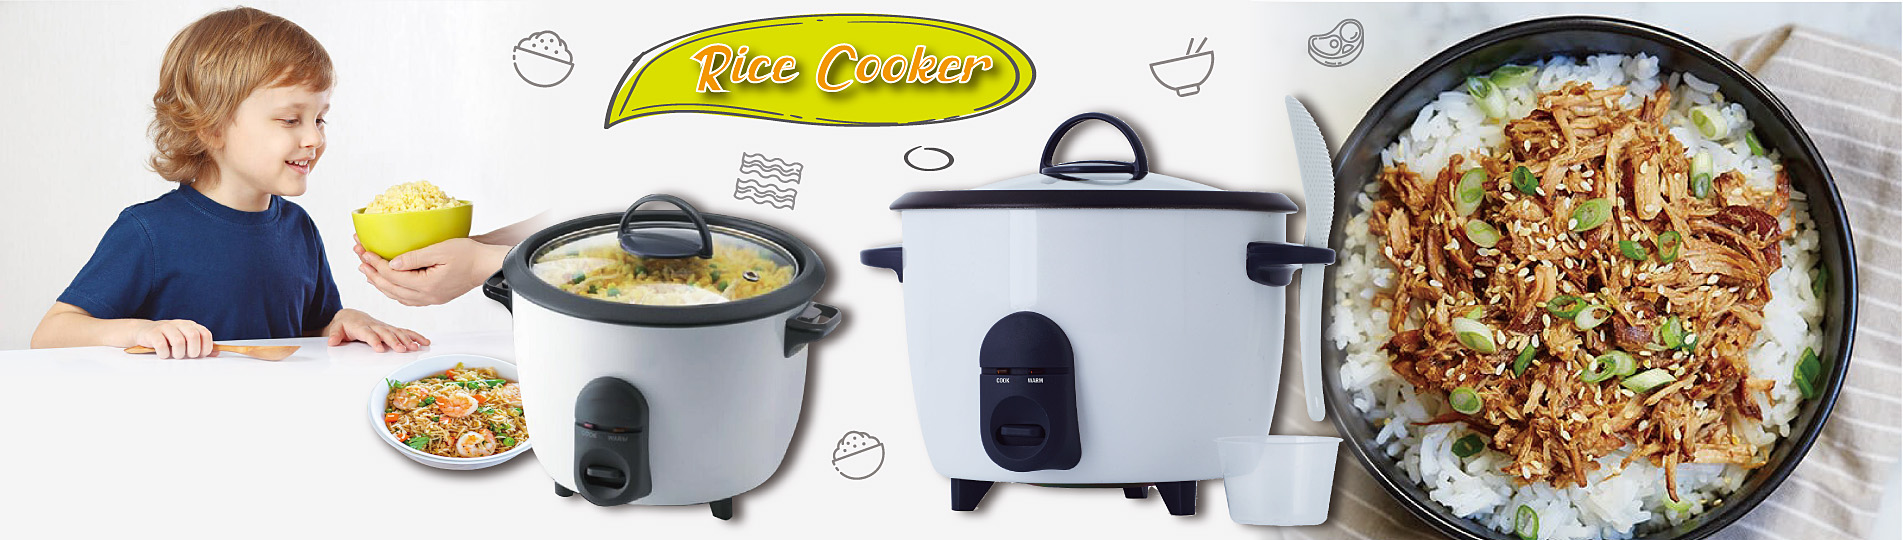 Slow & Rice cooker